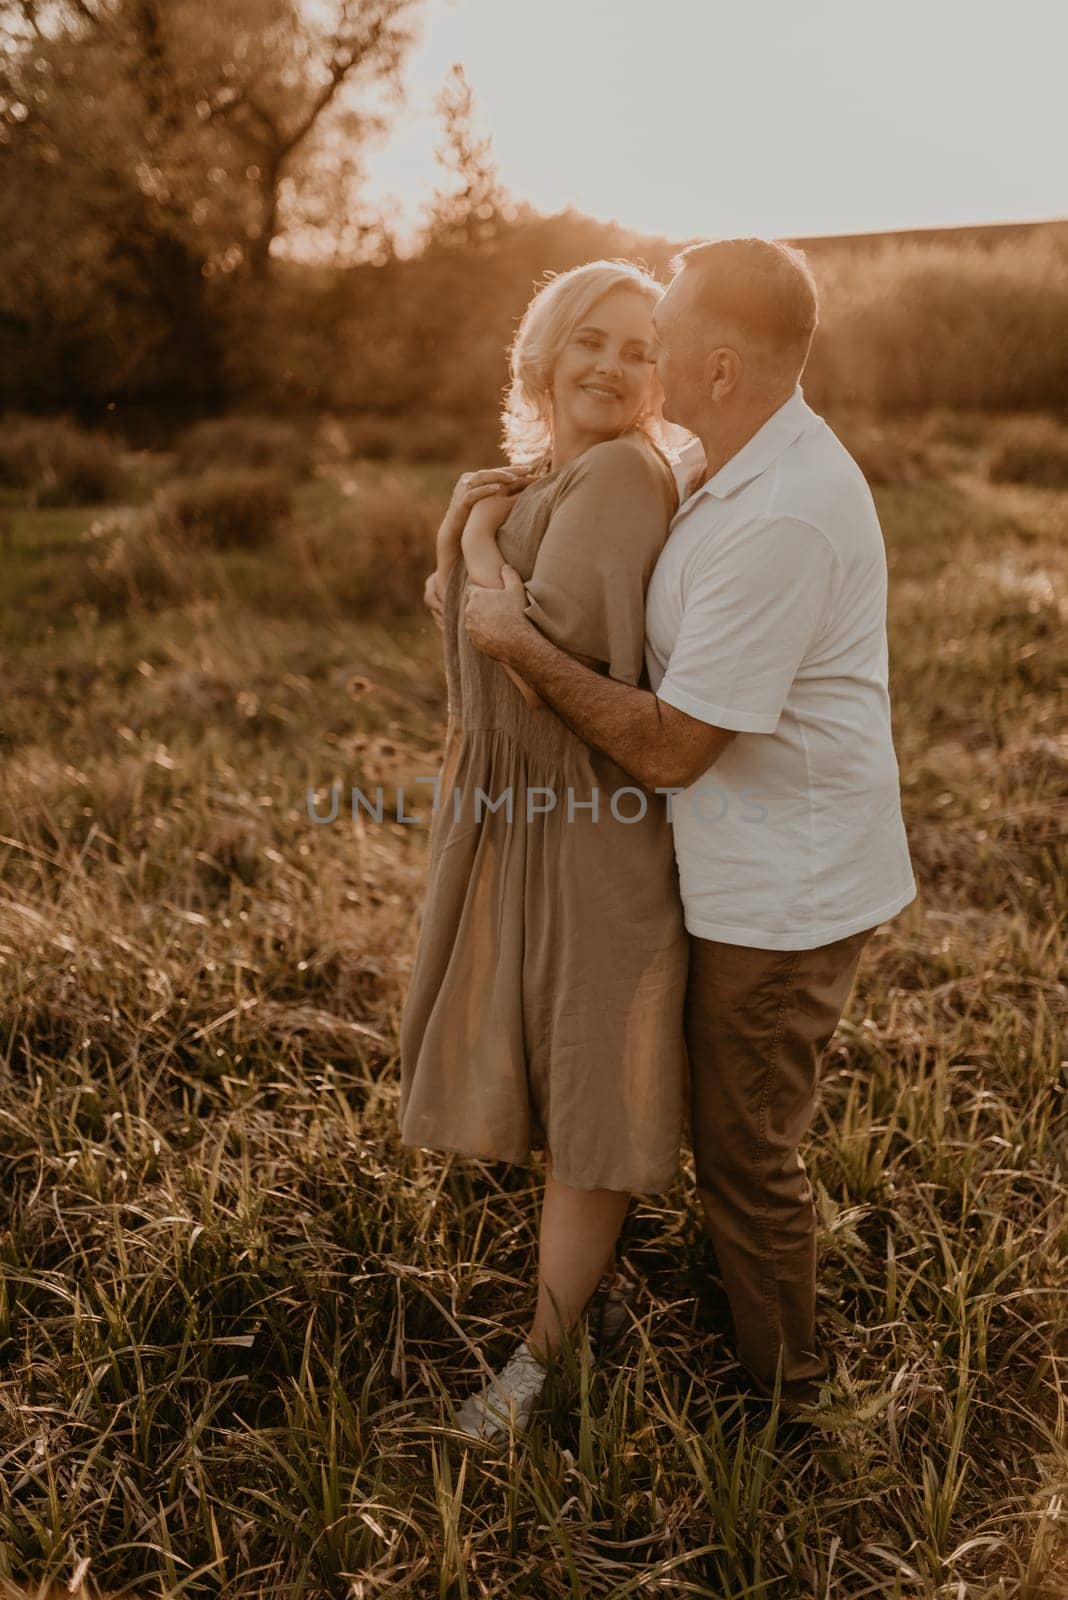 happy married couple mature people together for long time, secret of strong family relationships, cheerful joyful husband and wife together in harmony. middle-aged couple walking in nature at summer